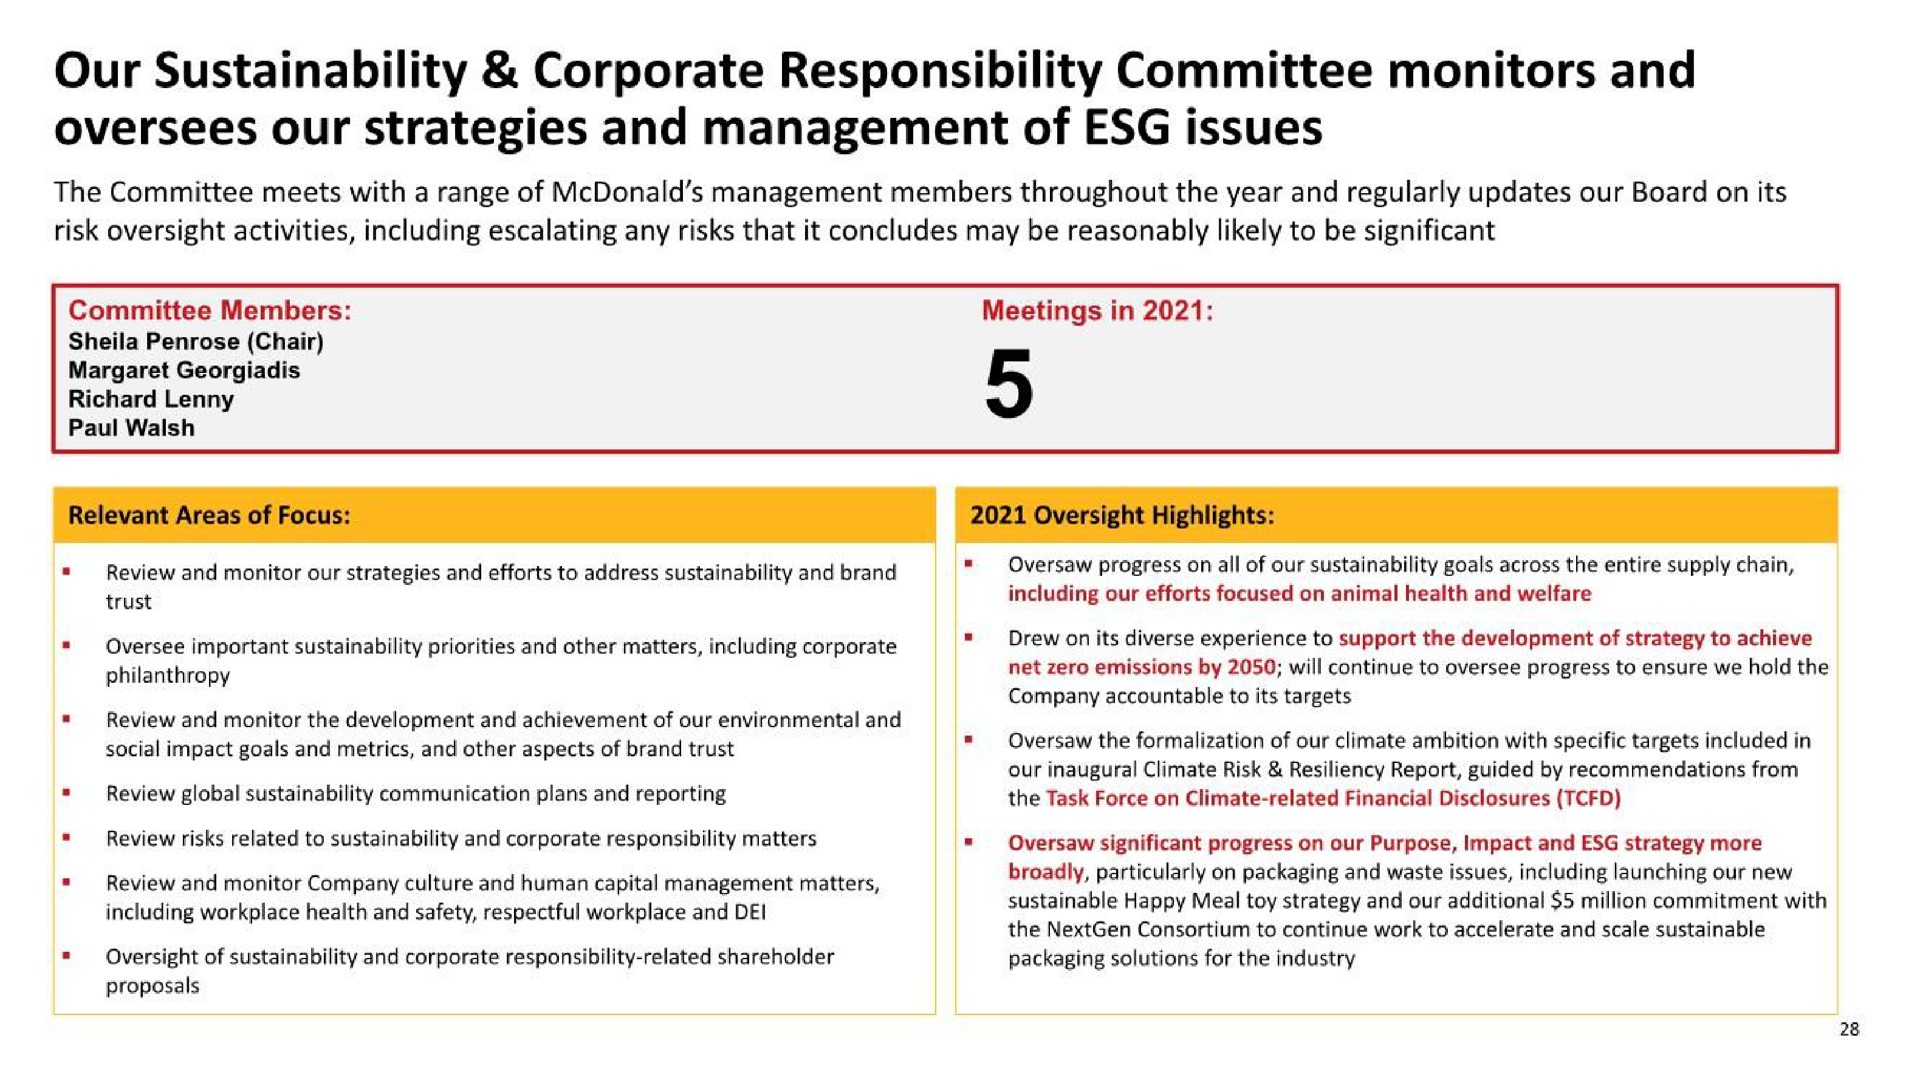 our corporate responsibility committee monitors and oversees our strategies and management of issues | McDonald's